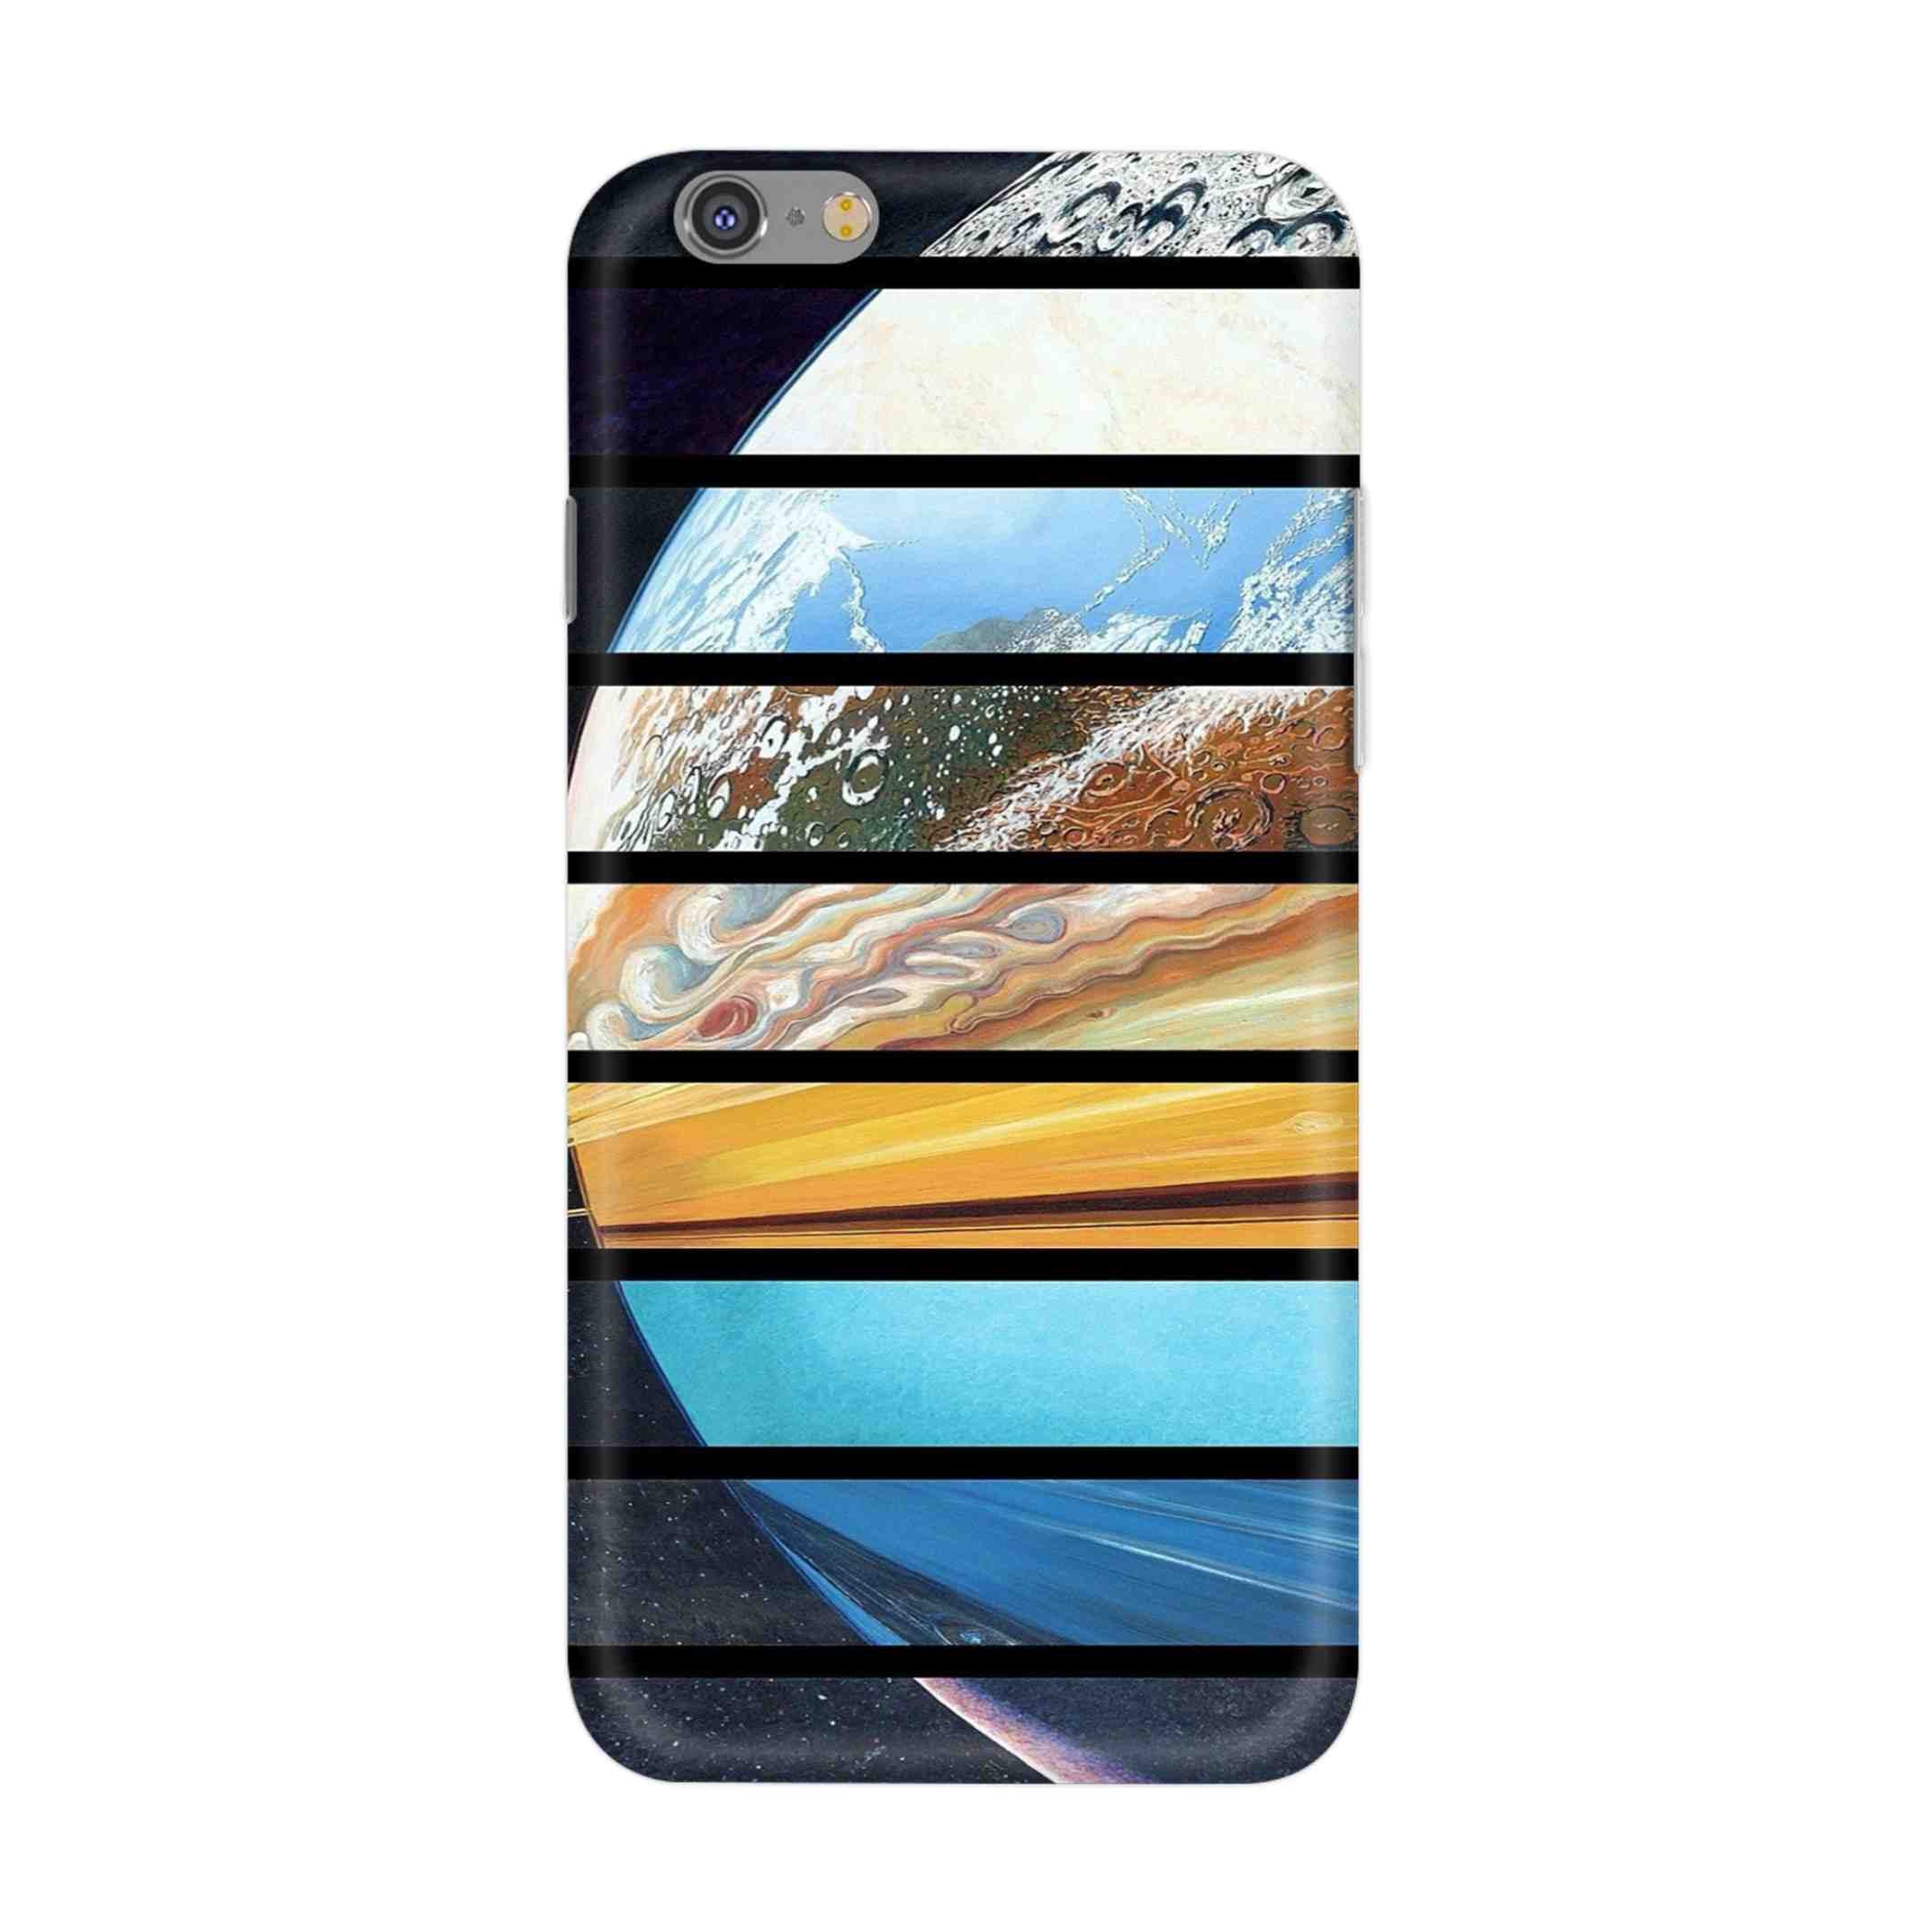 Buy Colourful Earth Hard Back Mobile Phone Case/Cover For iPhone 6 Plus / 6s Plus Online